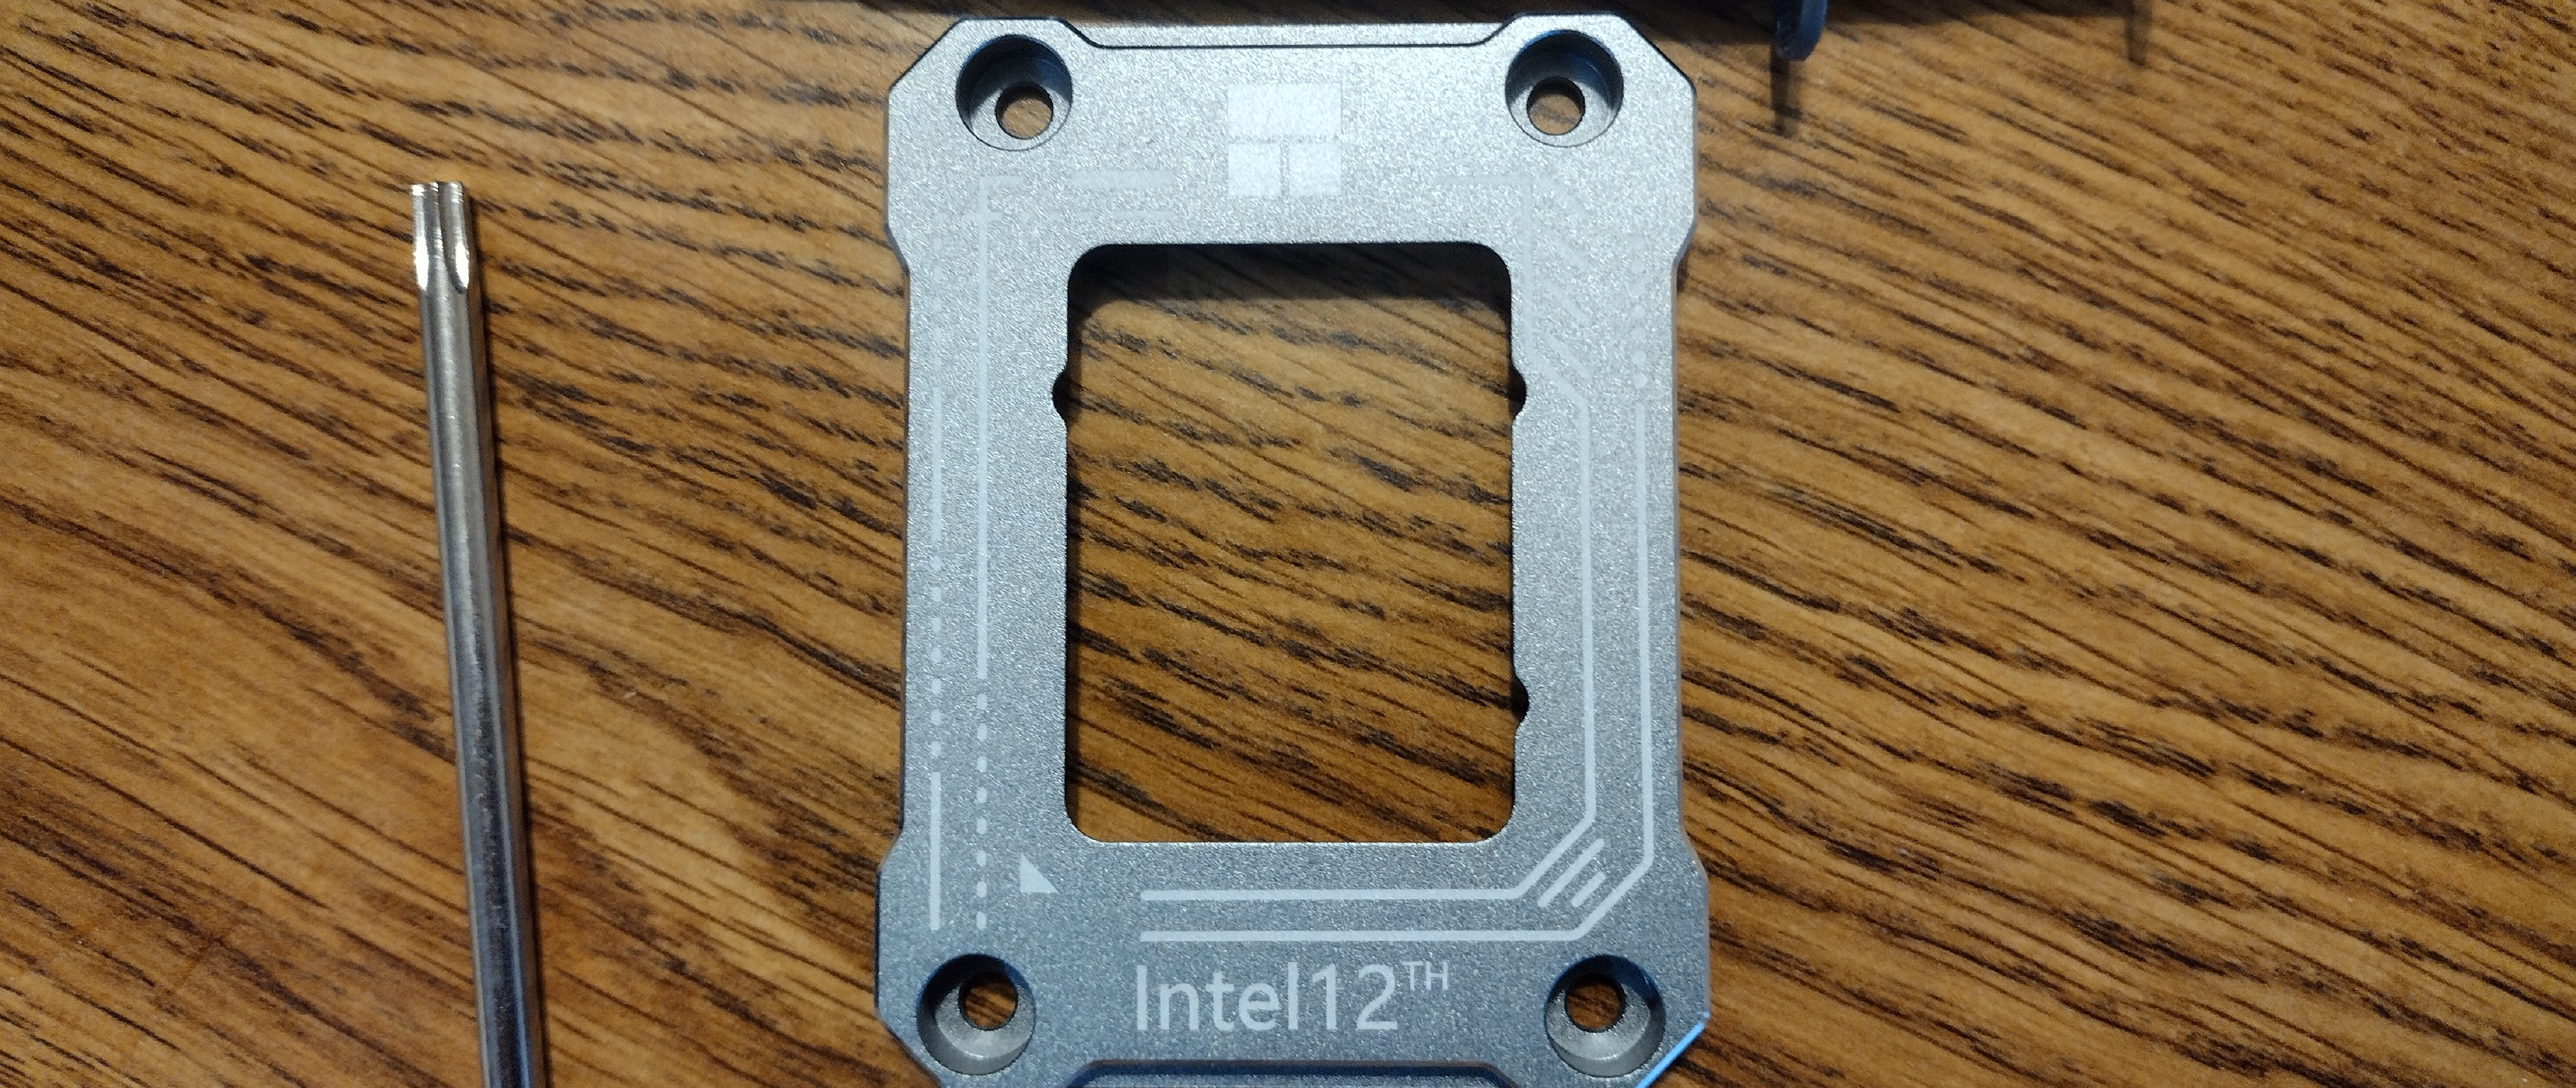  Nab Cooling Intel CPU Contact Frame 13th Gen + Thermal